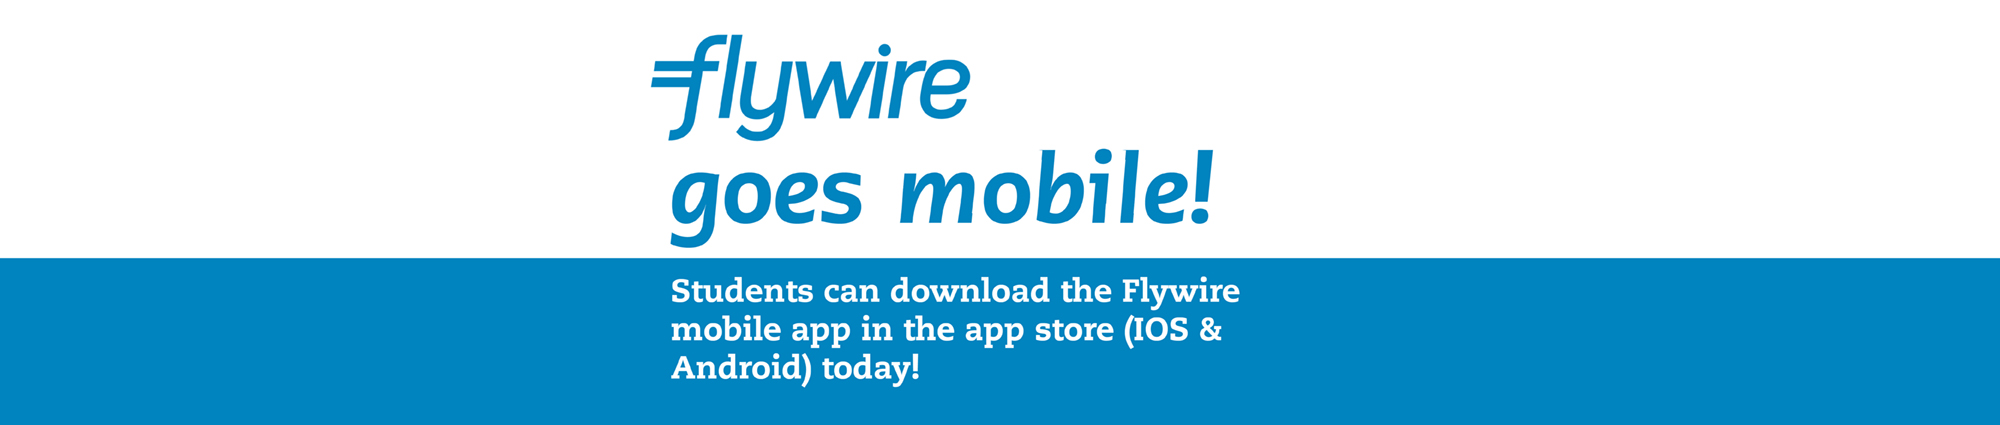 Flywire goes mobile! Students can download the Flywire mobile app in the app store (iOS & Android) today!